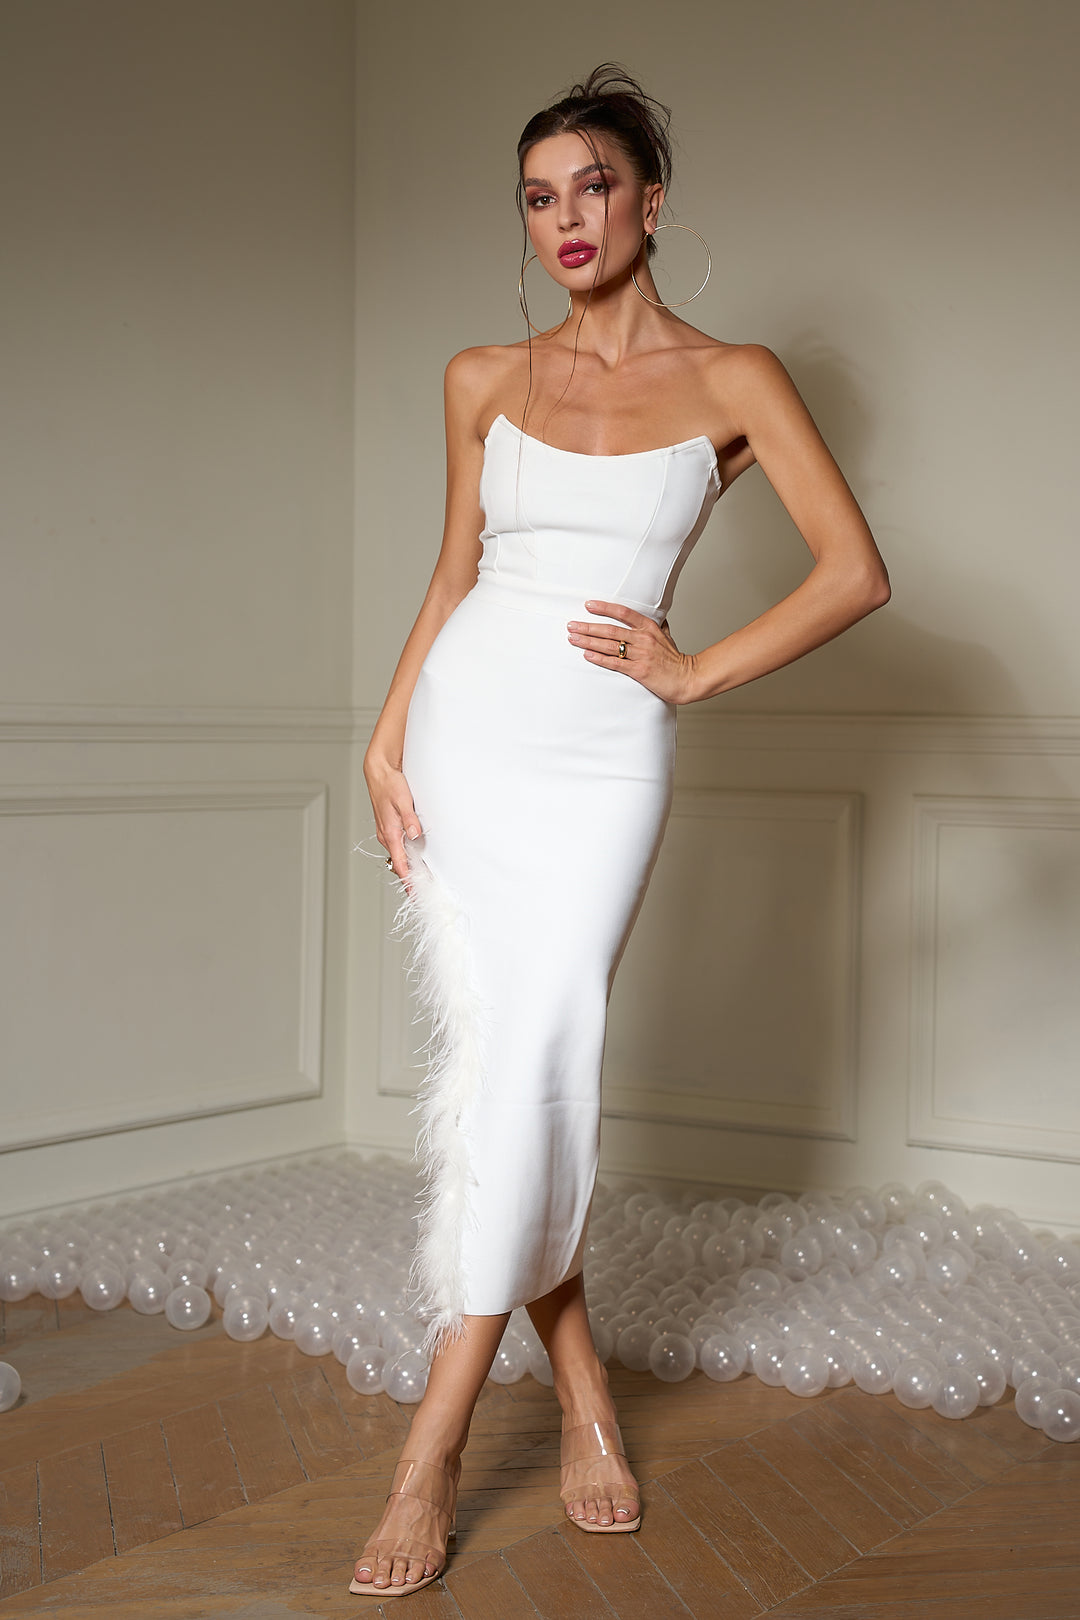 Sesidy Leilani Stunning Feather White Dress in S